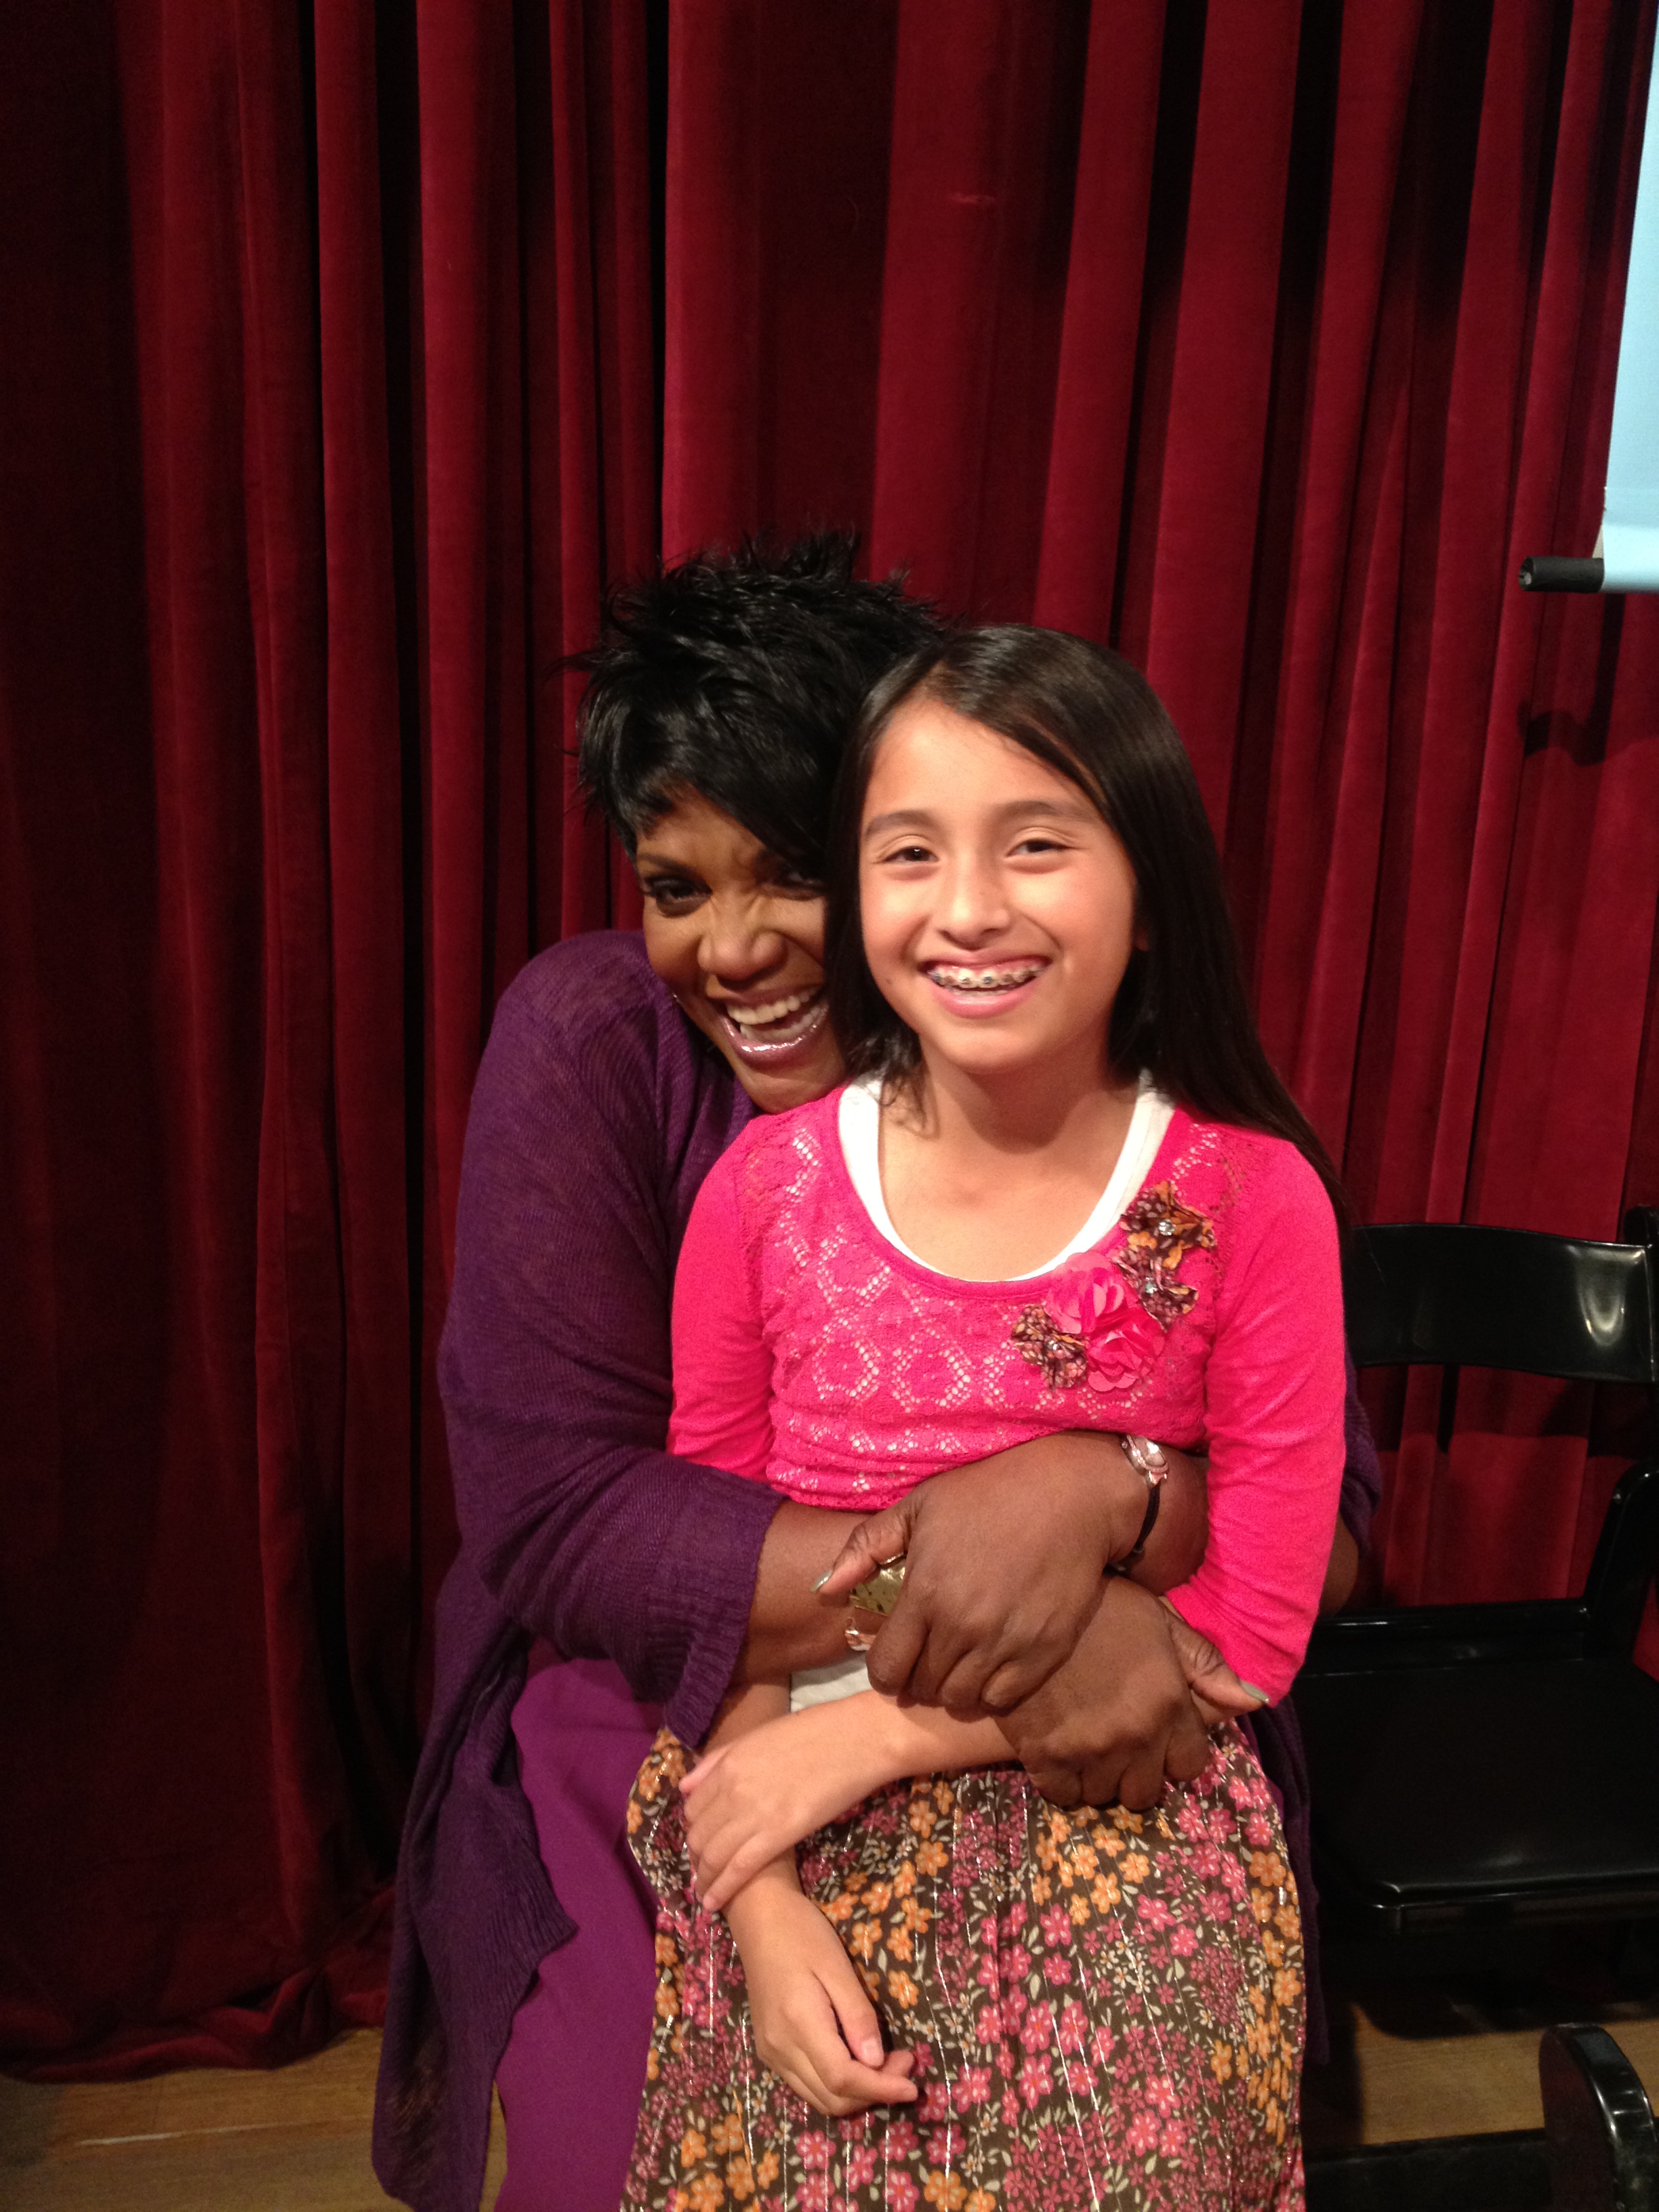 Sydnie & Anna Maria Horsford on set of Reed Between the Lines.